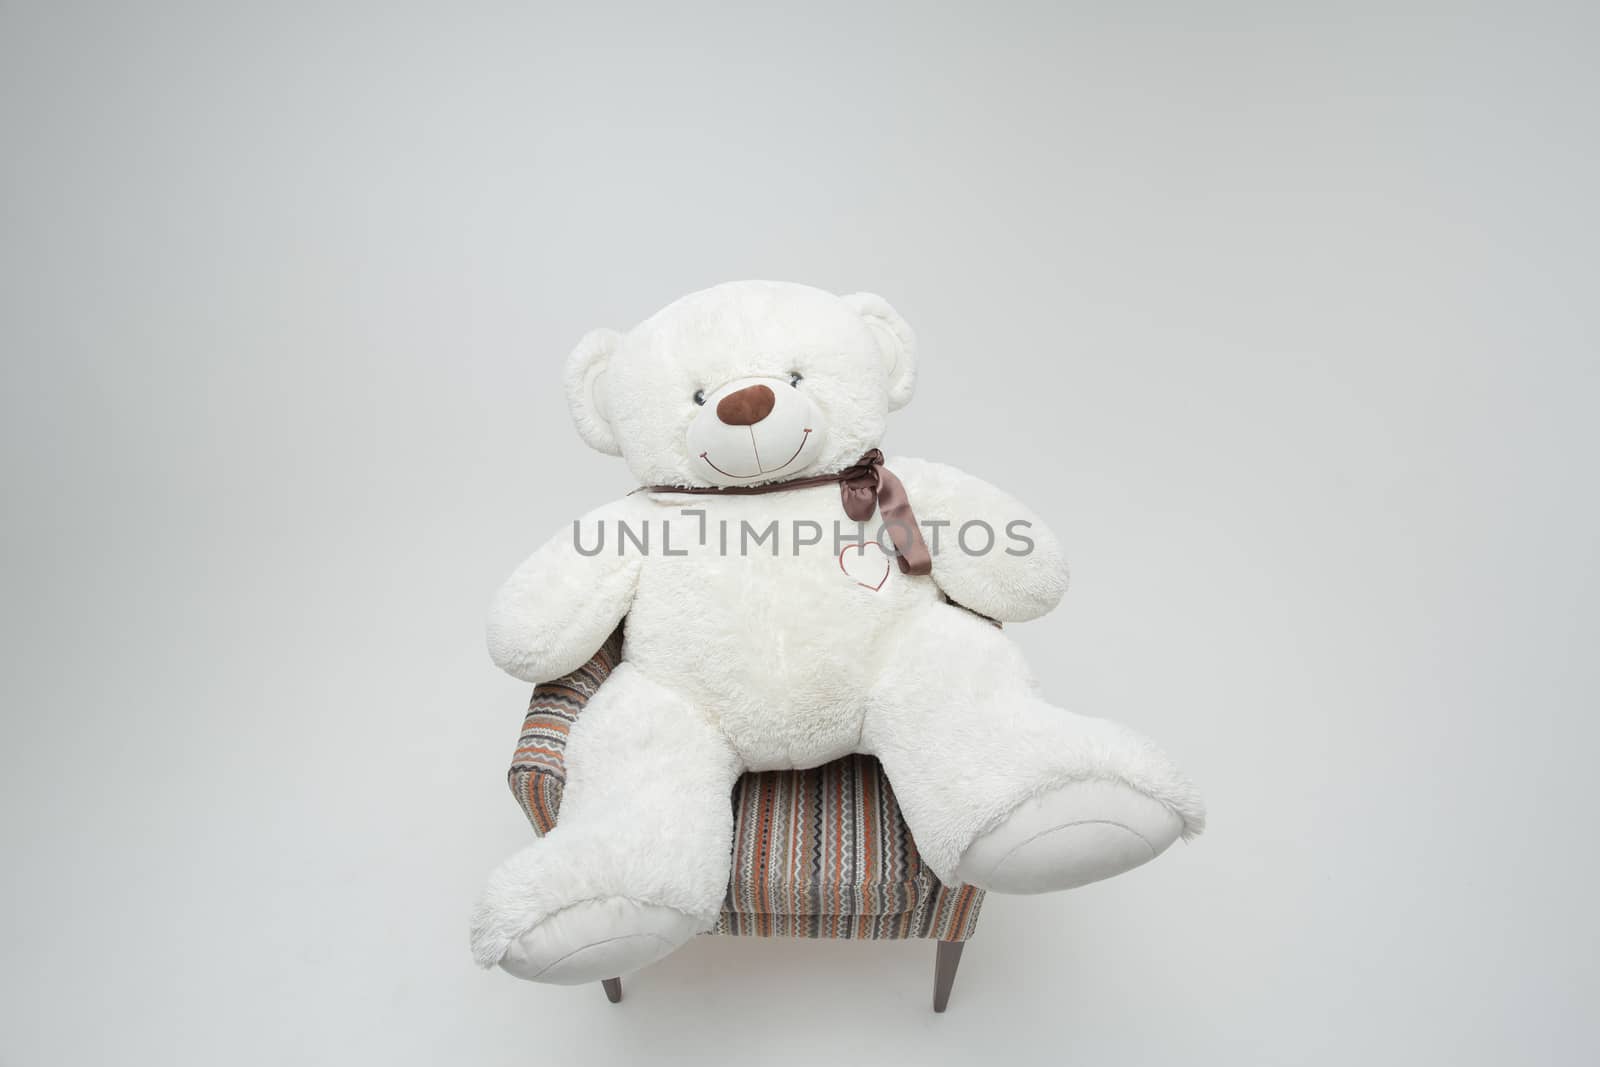 Teddy bear and classic soft chair on white blackground